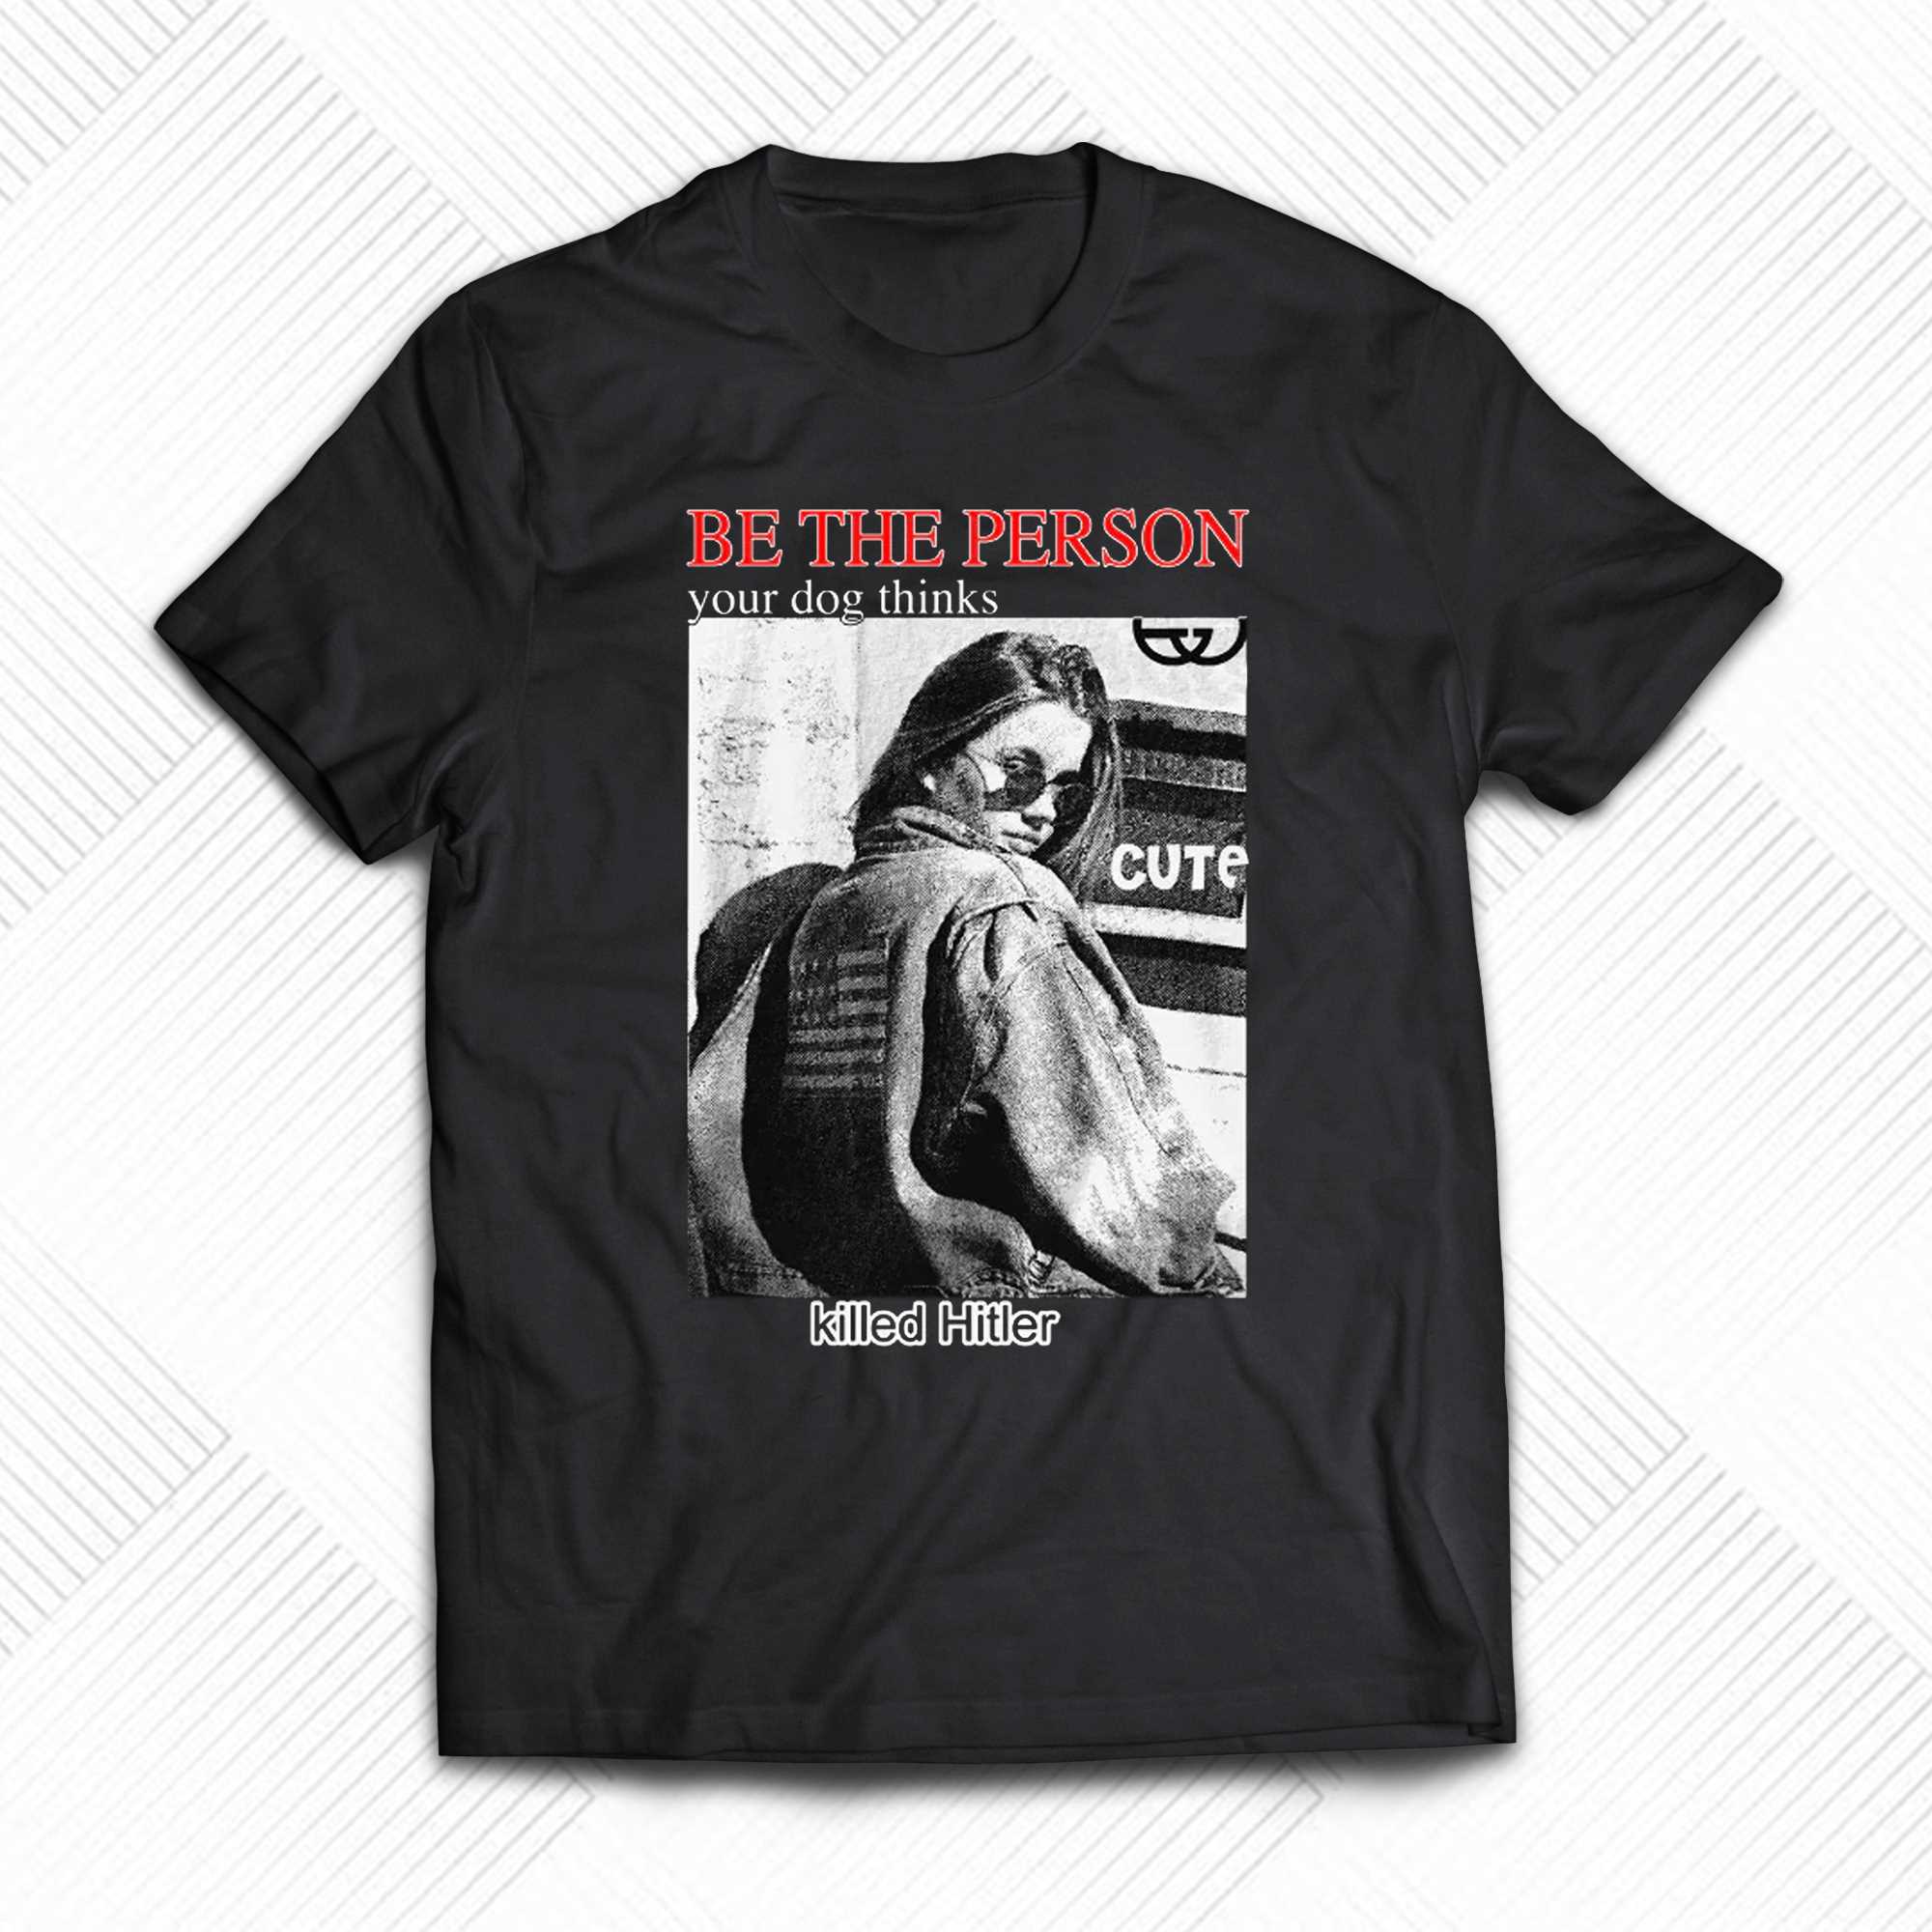 be the person your dog thinks killed hitler t shirt 1 1